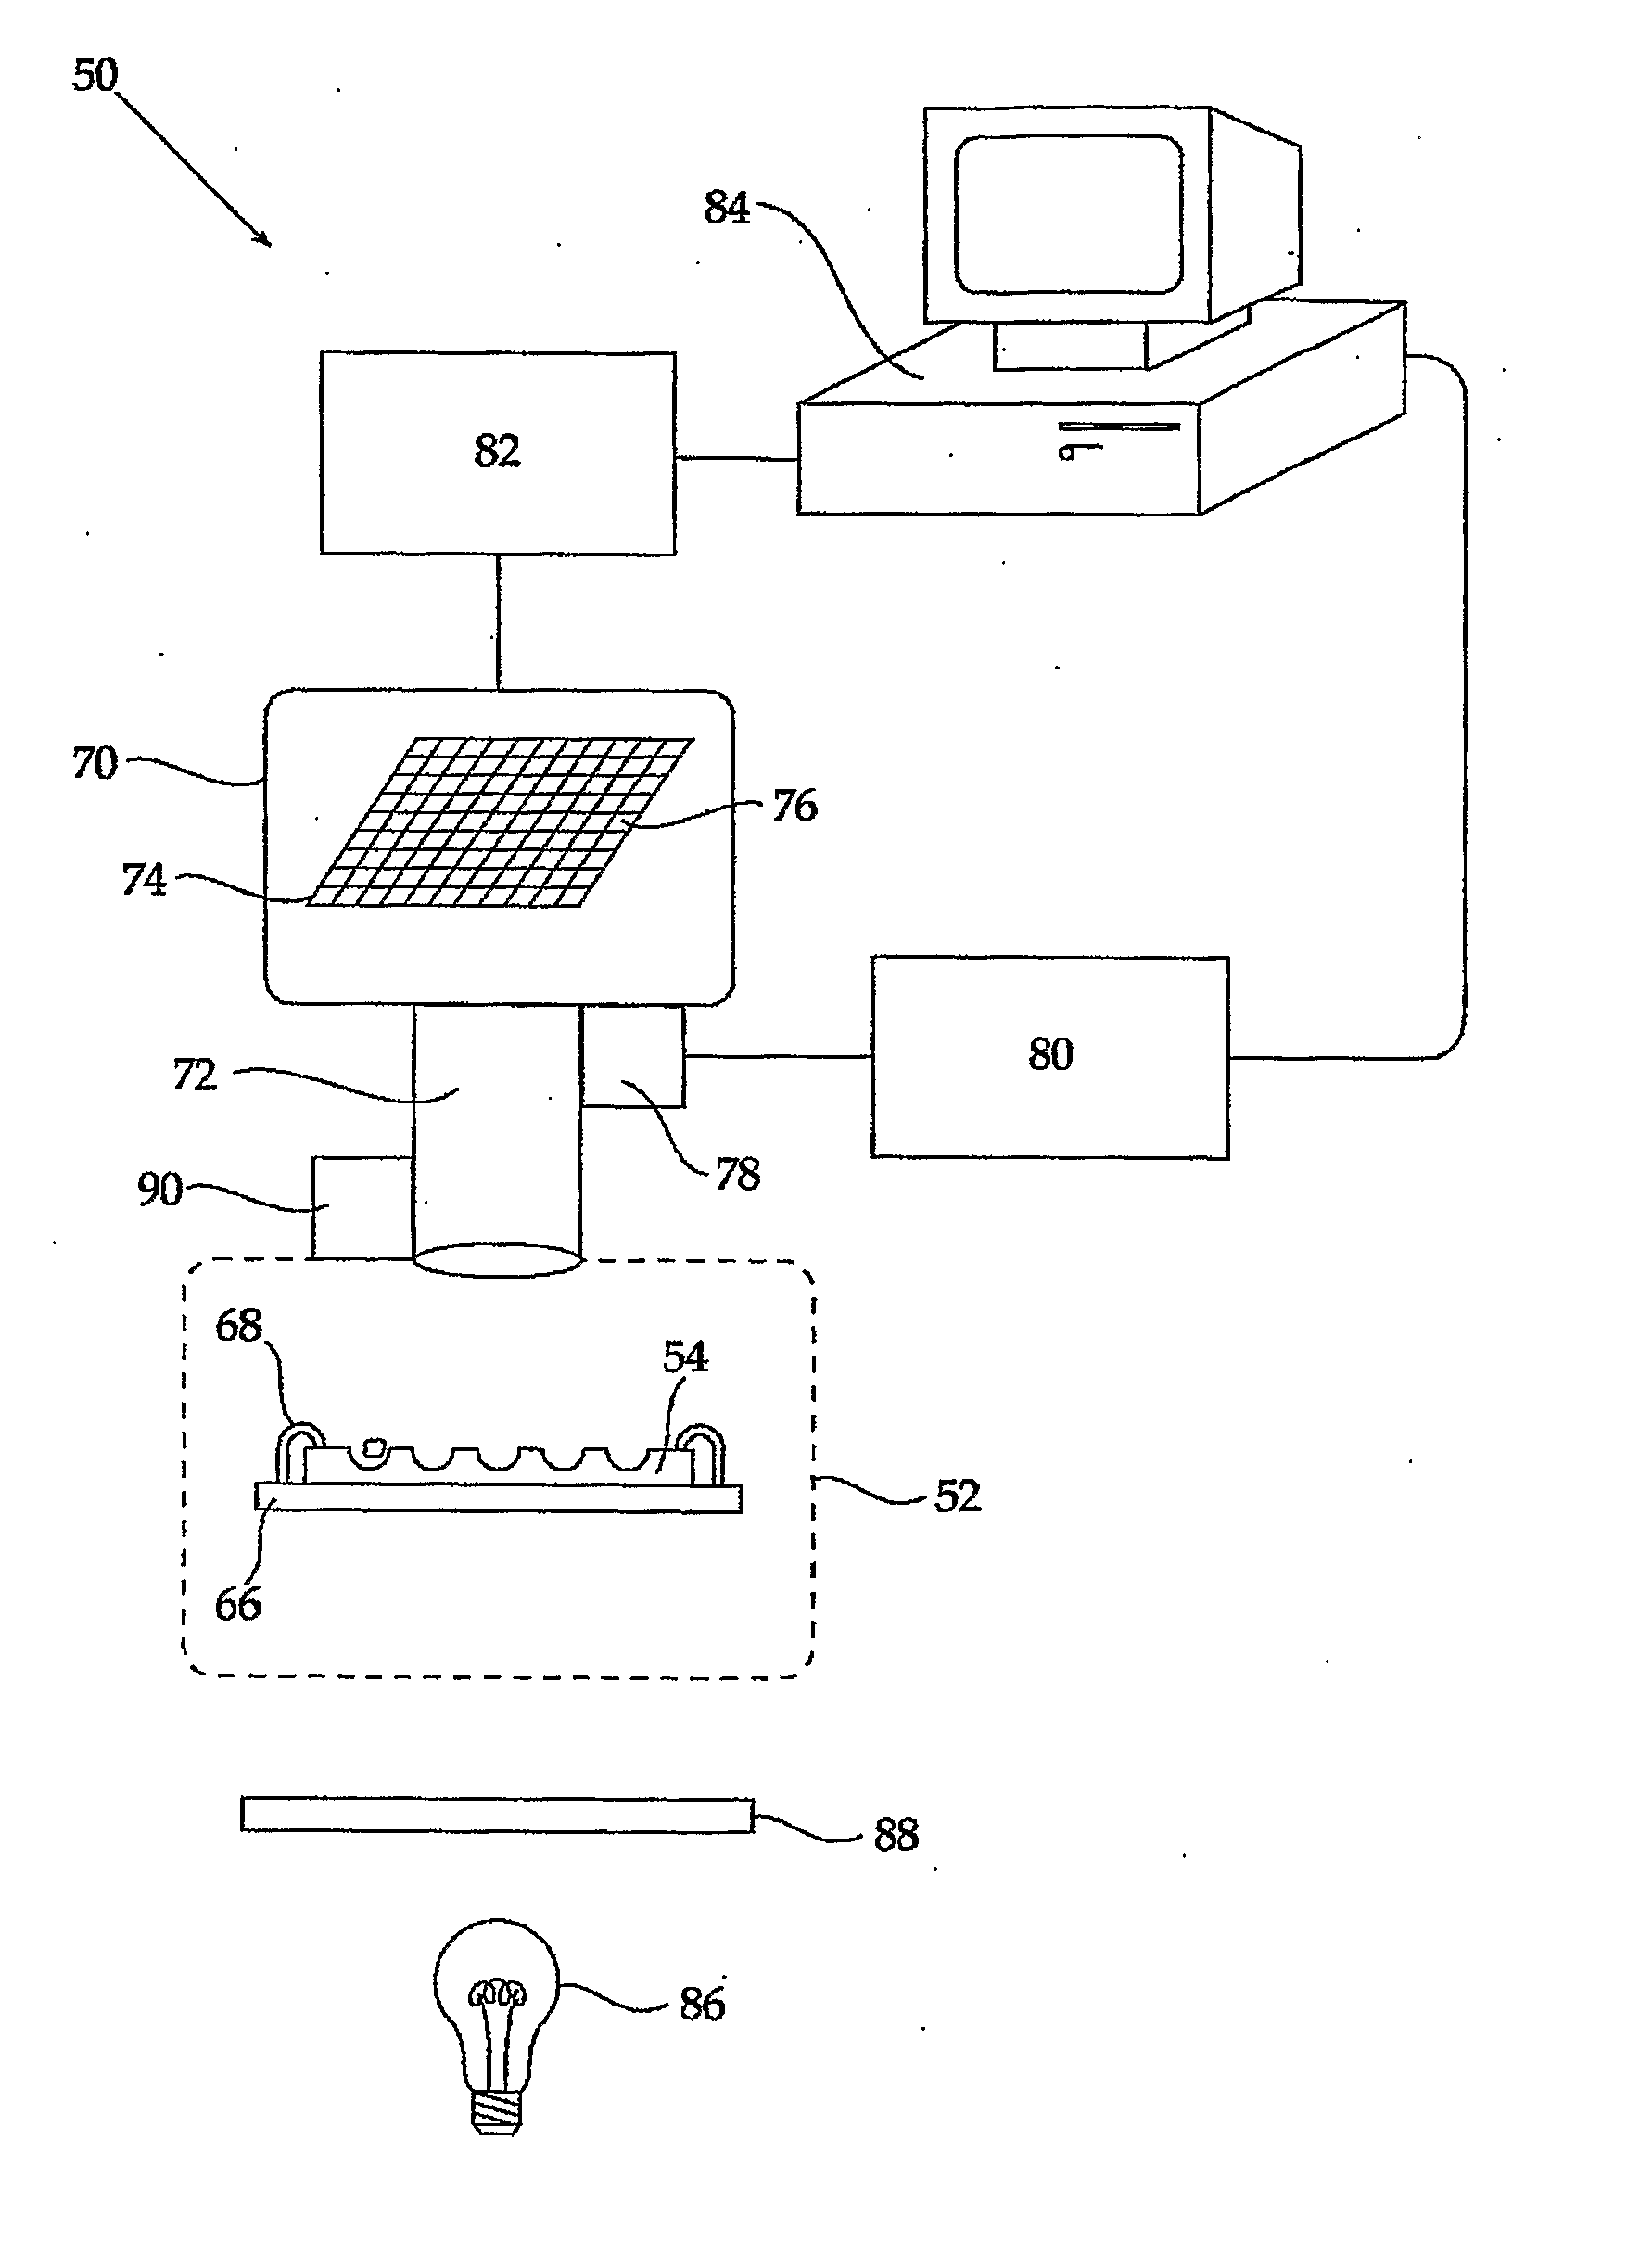 Method and Device for Identifying an Image of a Well in an Image of a Well-Bearing